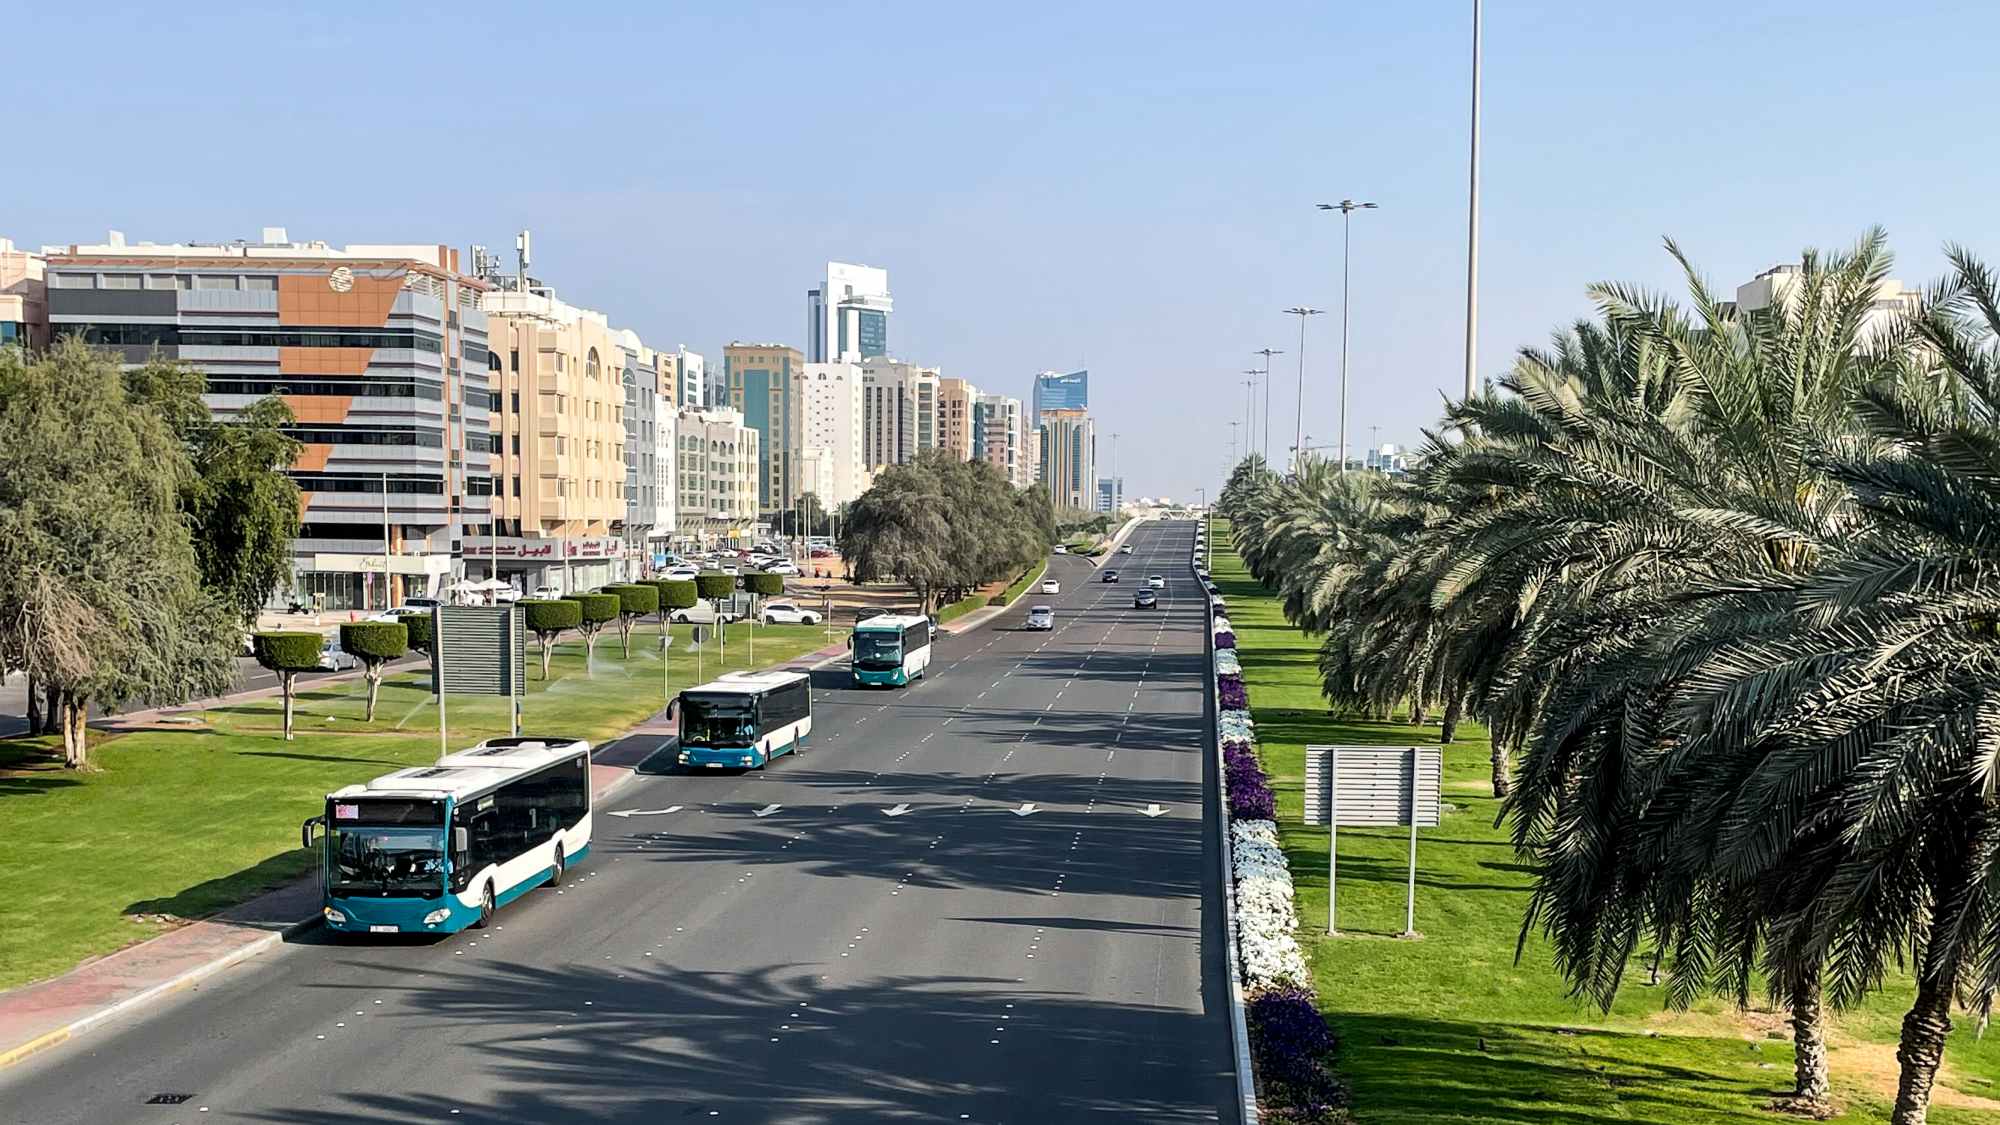 Buses on the highway in Abu Dhabi